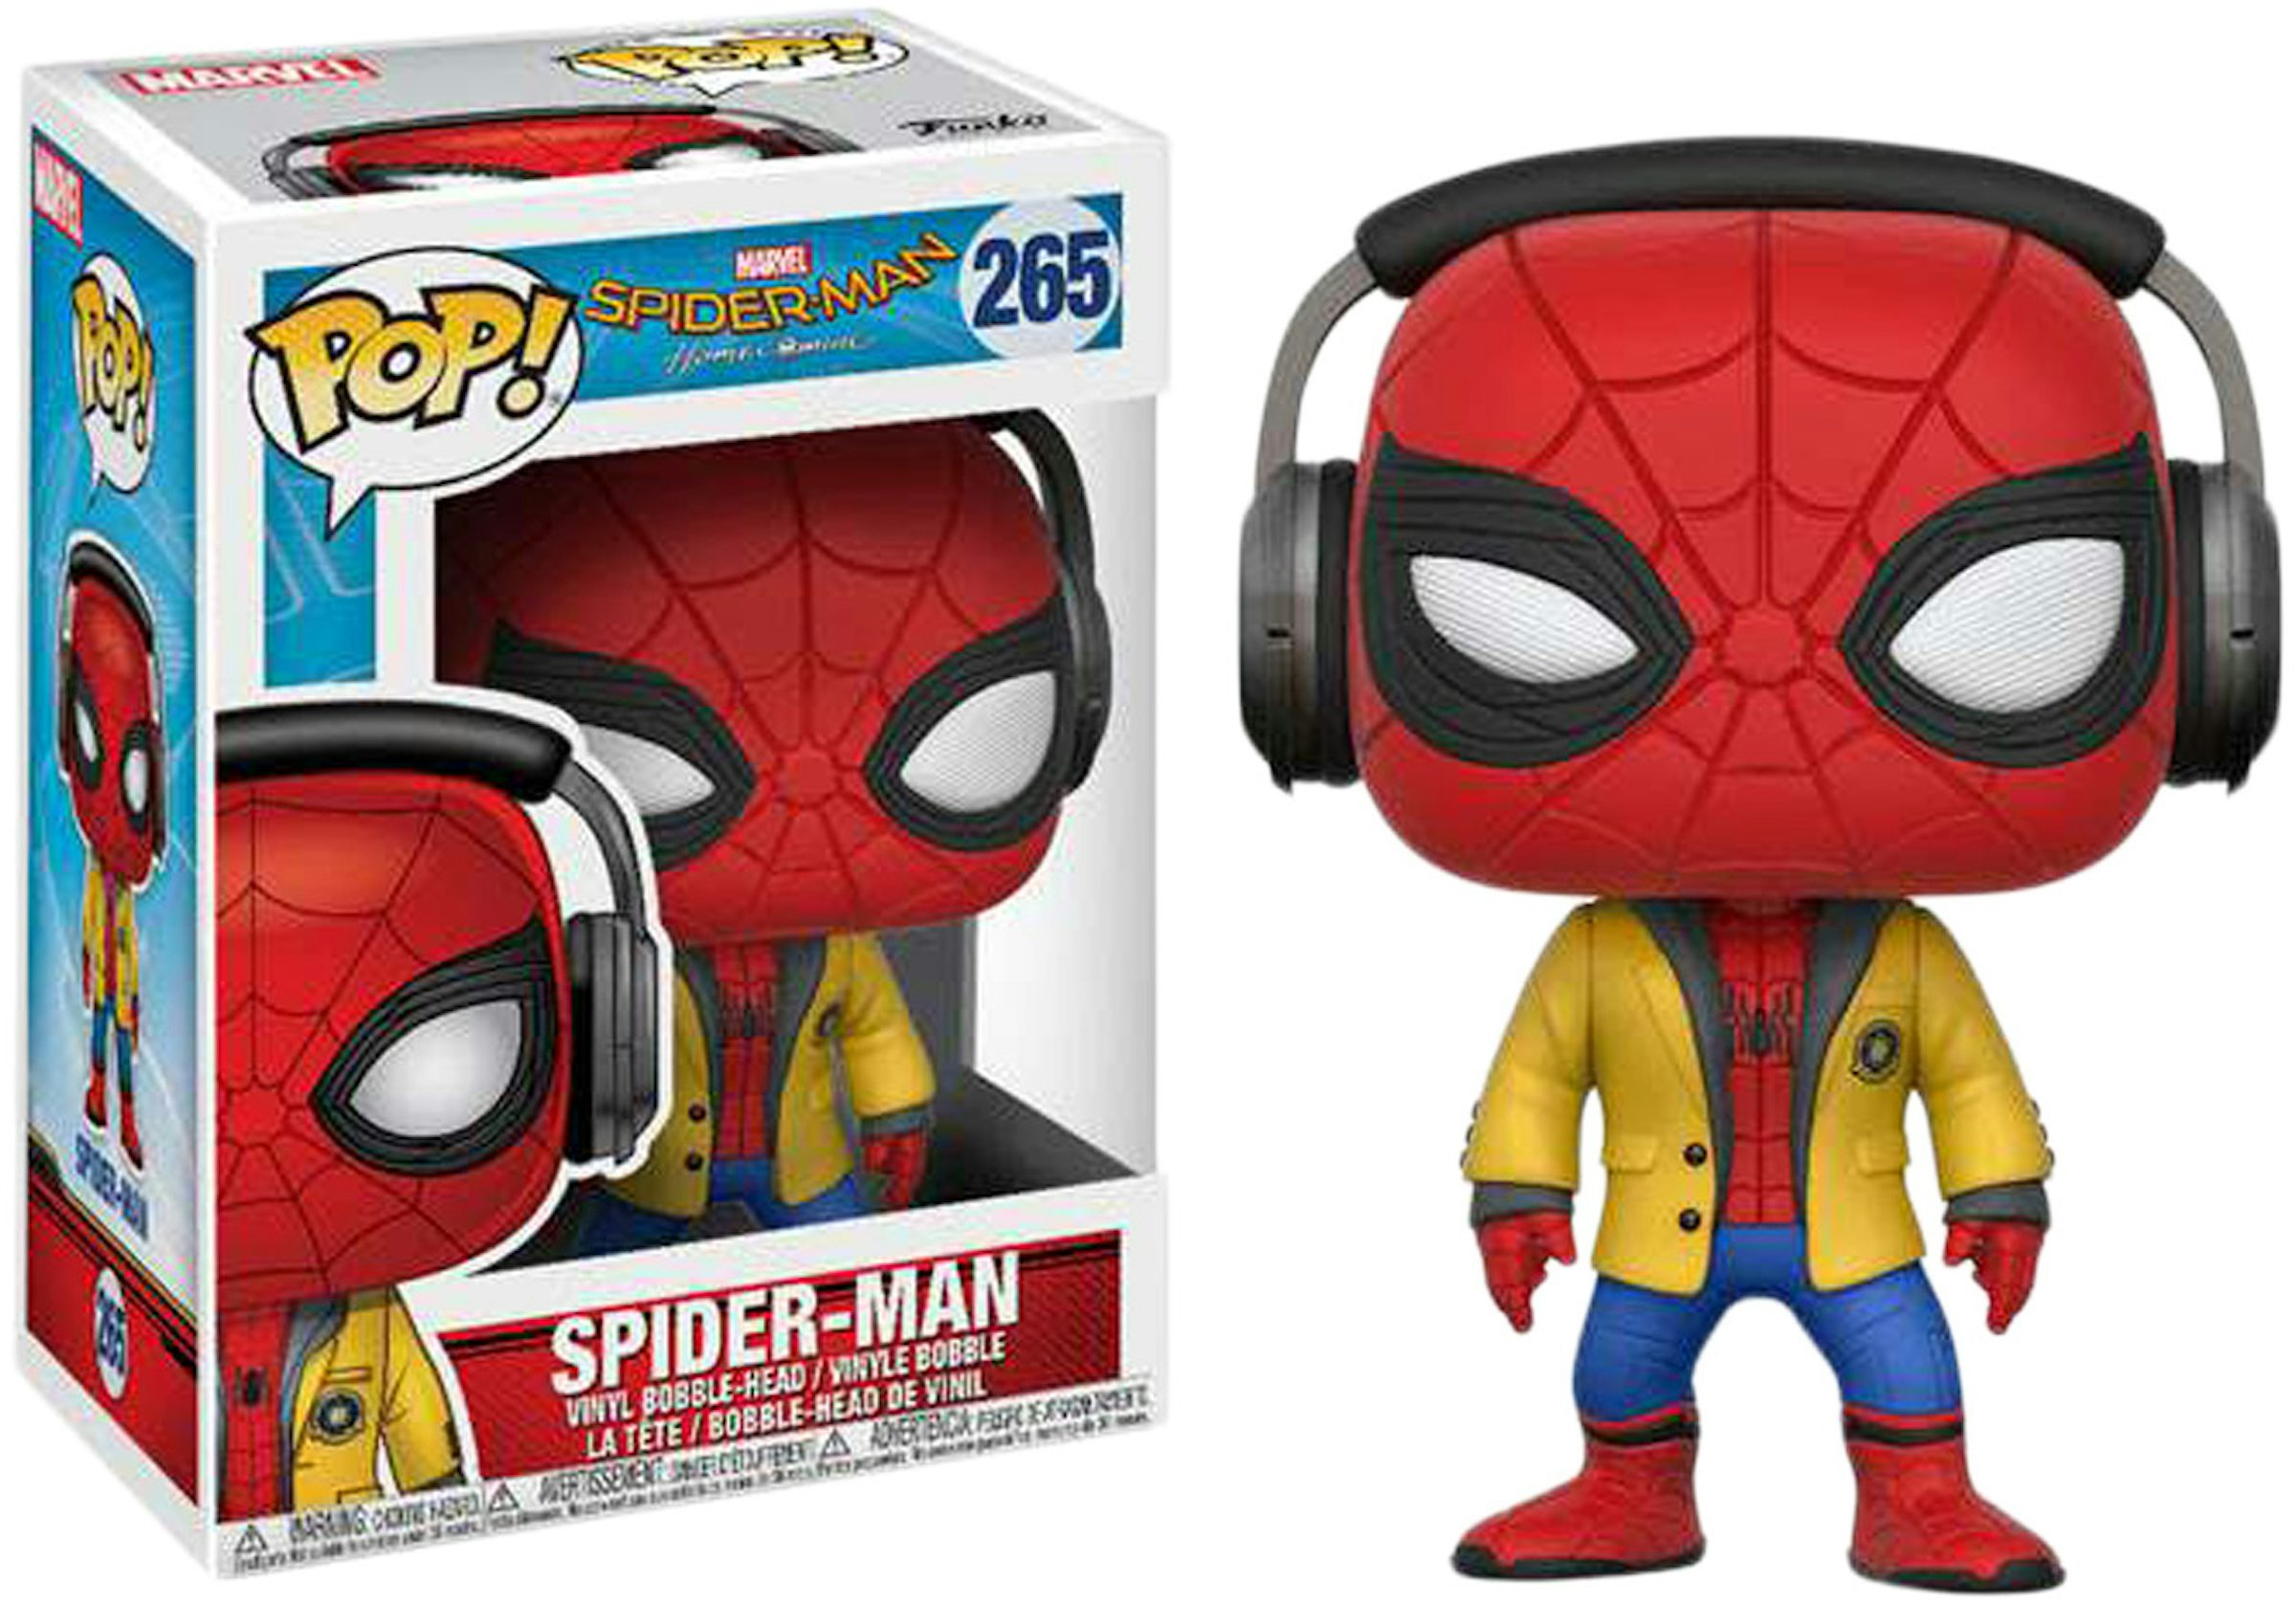 Spiderman head compatible with Playmobil